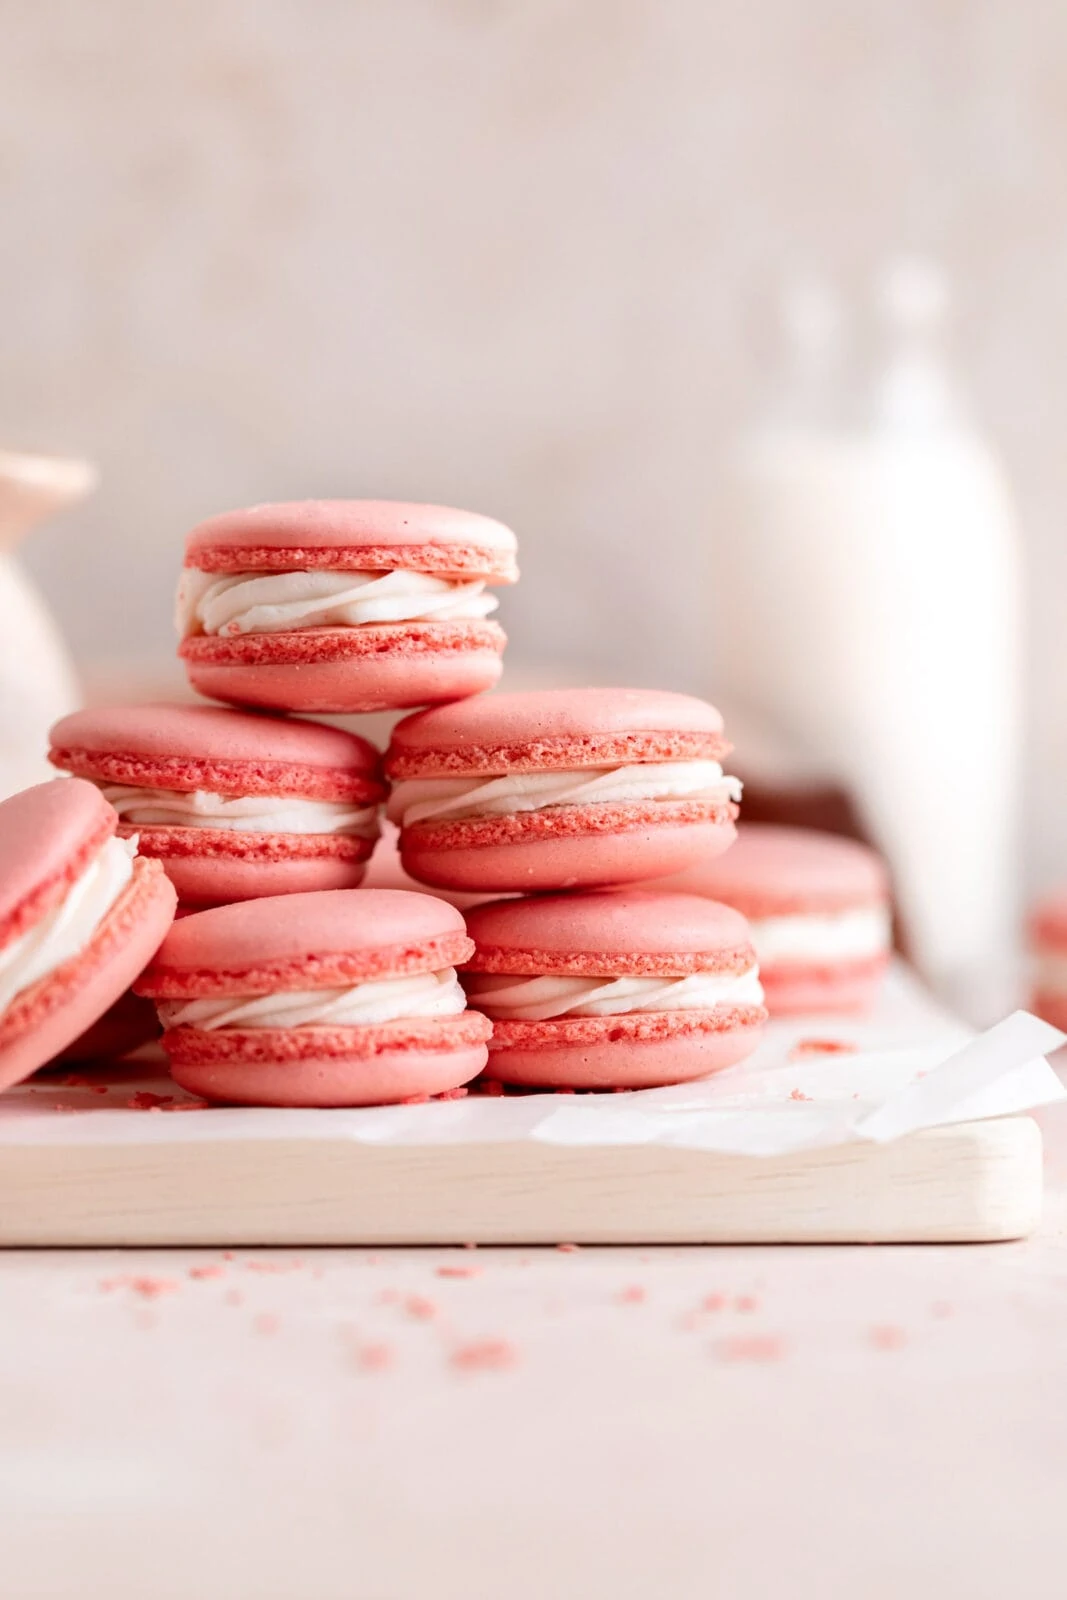 Foolproof Macaron Recipe (Step by Step!) to make french macarons!